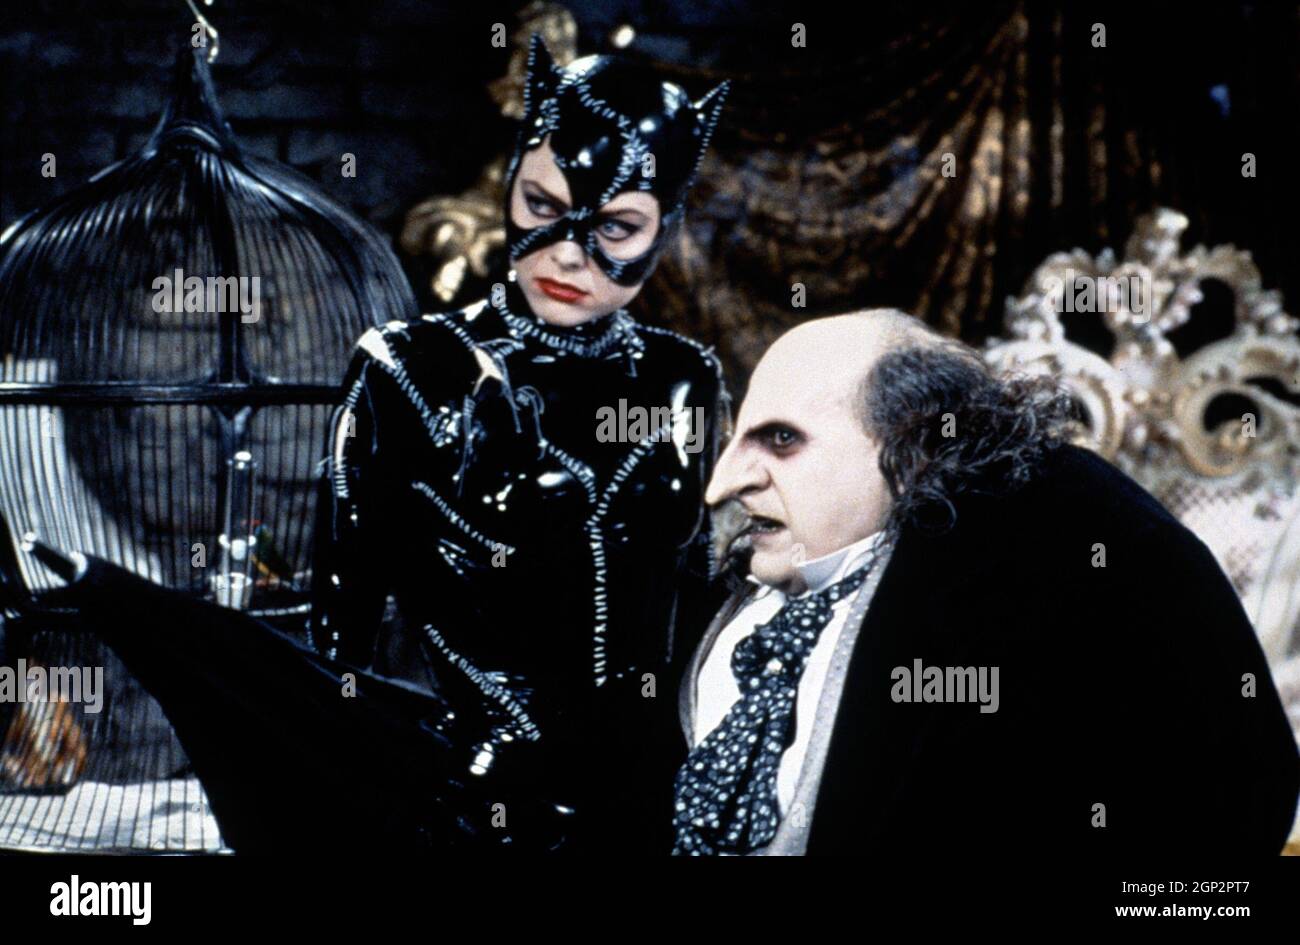 BATMAN RETURNS, from left: Michelle Pfeiffer as Catwoman, Danny DeVito as  The Penguin, 1992. ©Warner Bros./courtesy Everett Collection Stock Photo -  Alamy